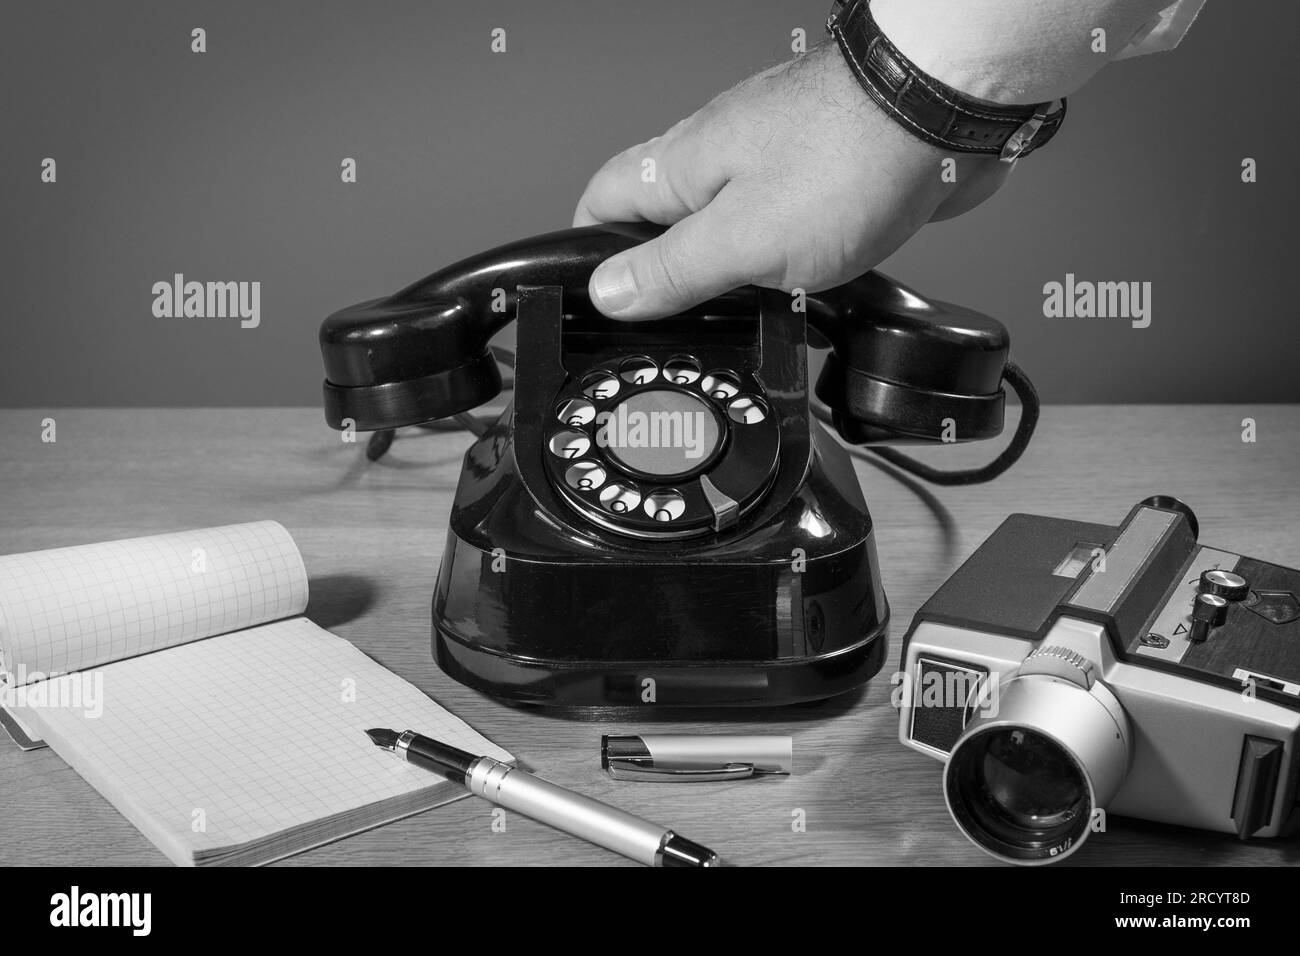 Exclusive reportage. Communications of the past. The hand reaches for the phone. Old telephone set on a wooden table, retro installation. Copy space Stock Photo